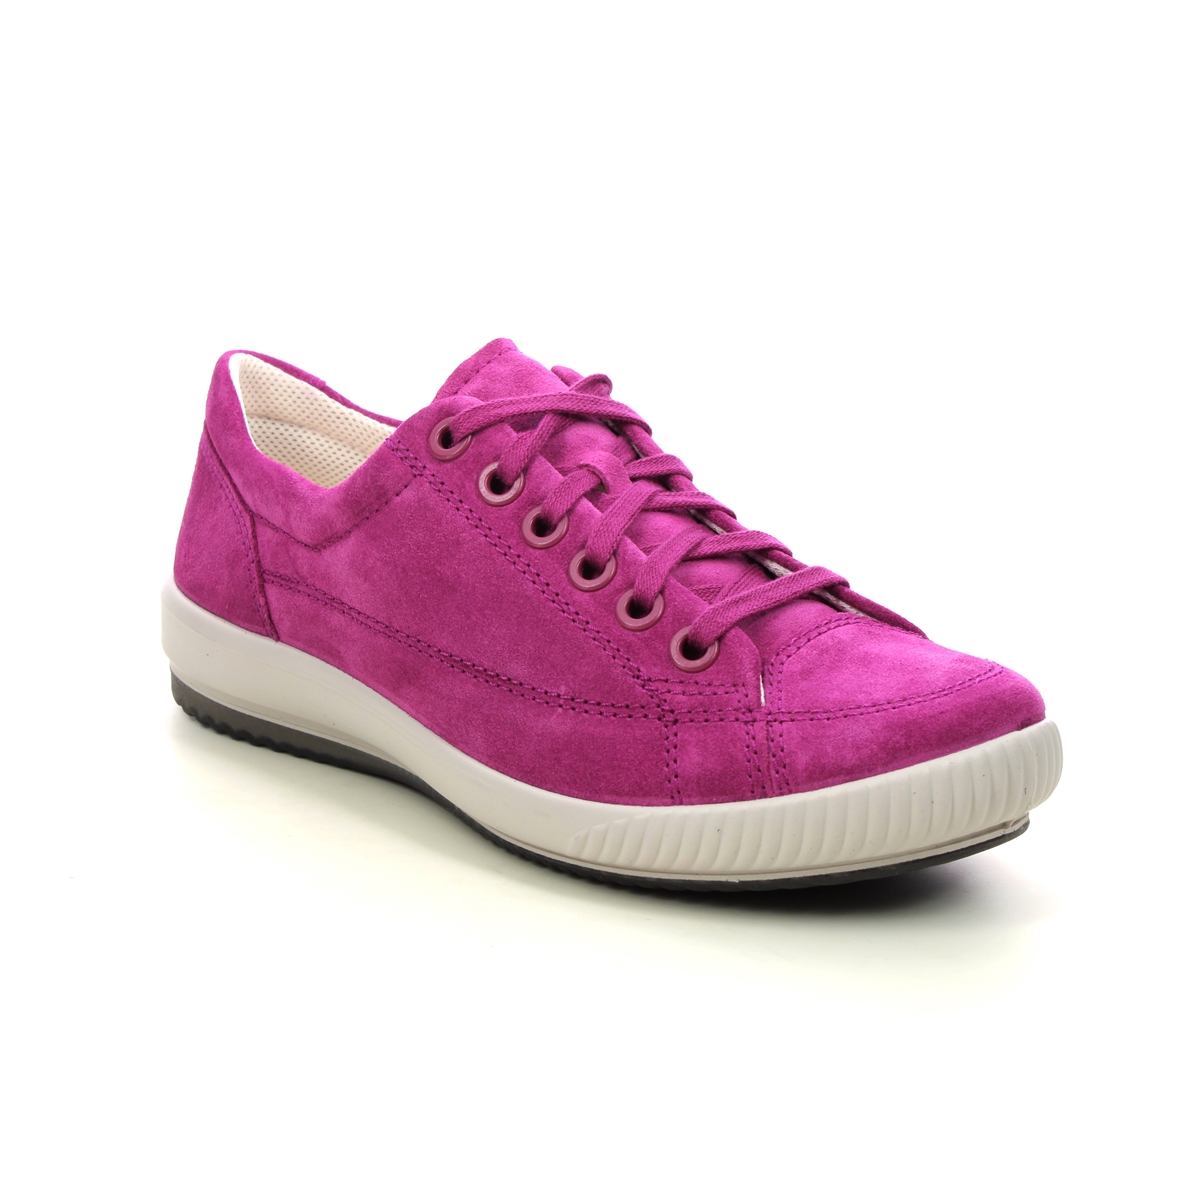 Legero Tanaro 5 Stitch Fuchsia Suede Womens lacing shoes 2000161-5670 in a Plain Leather in Size 4